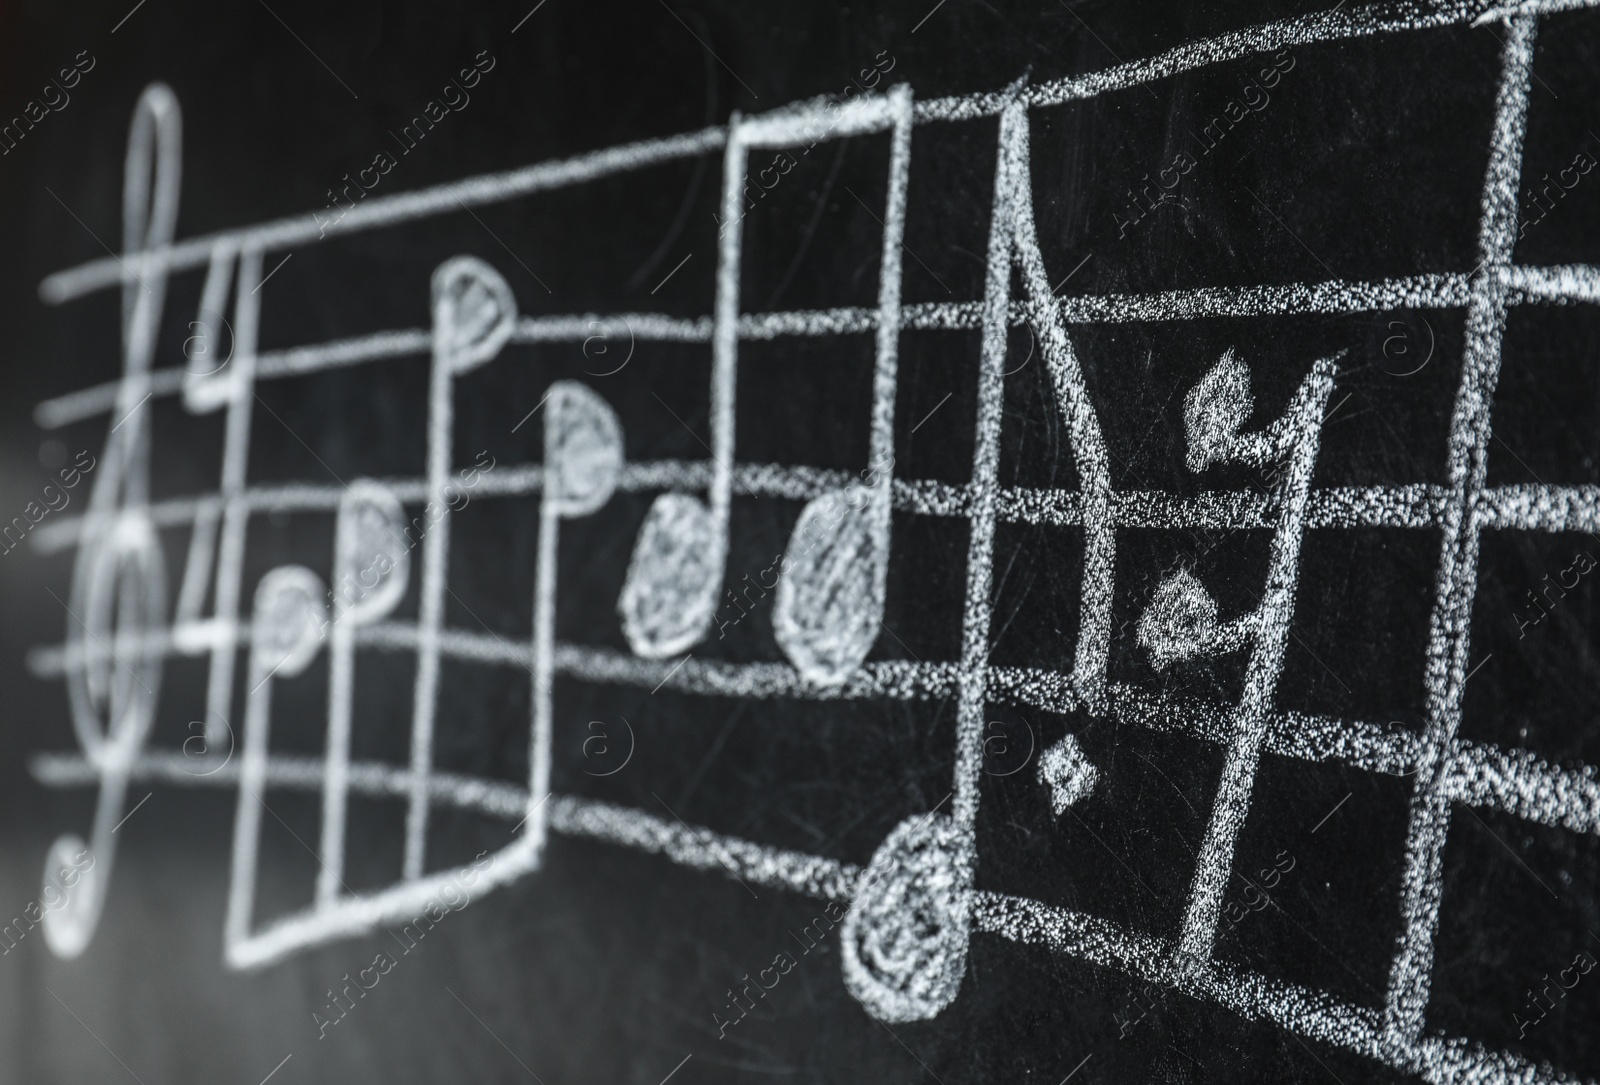 Photo of Music staff with treble clef and notes written on chalkboard